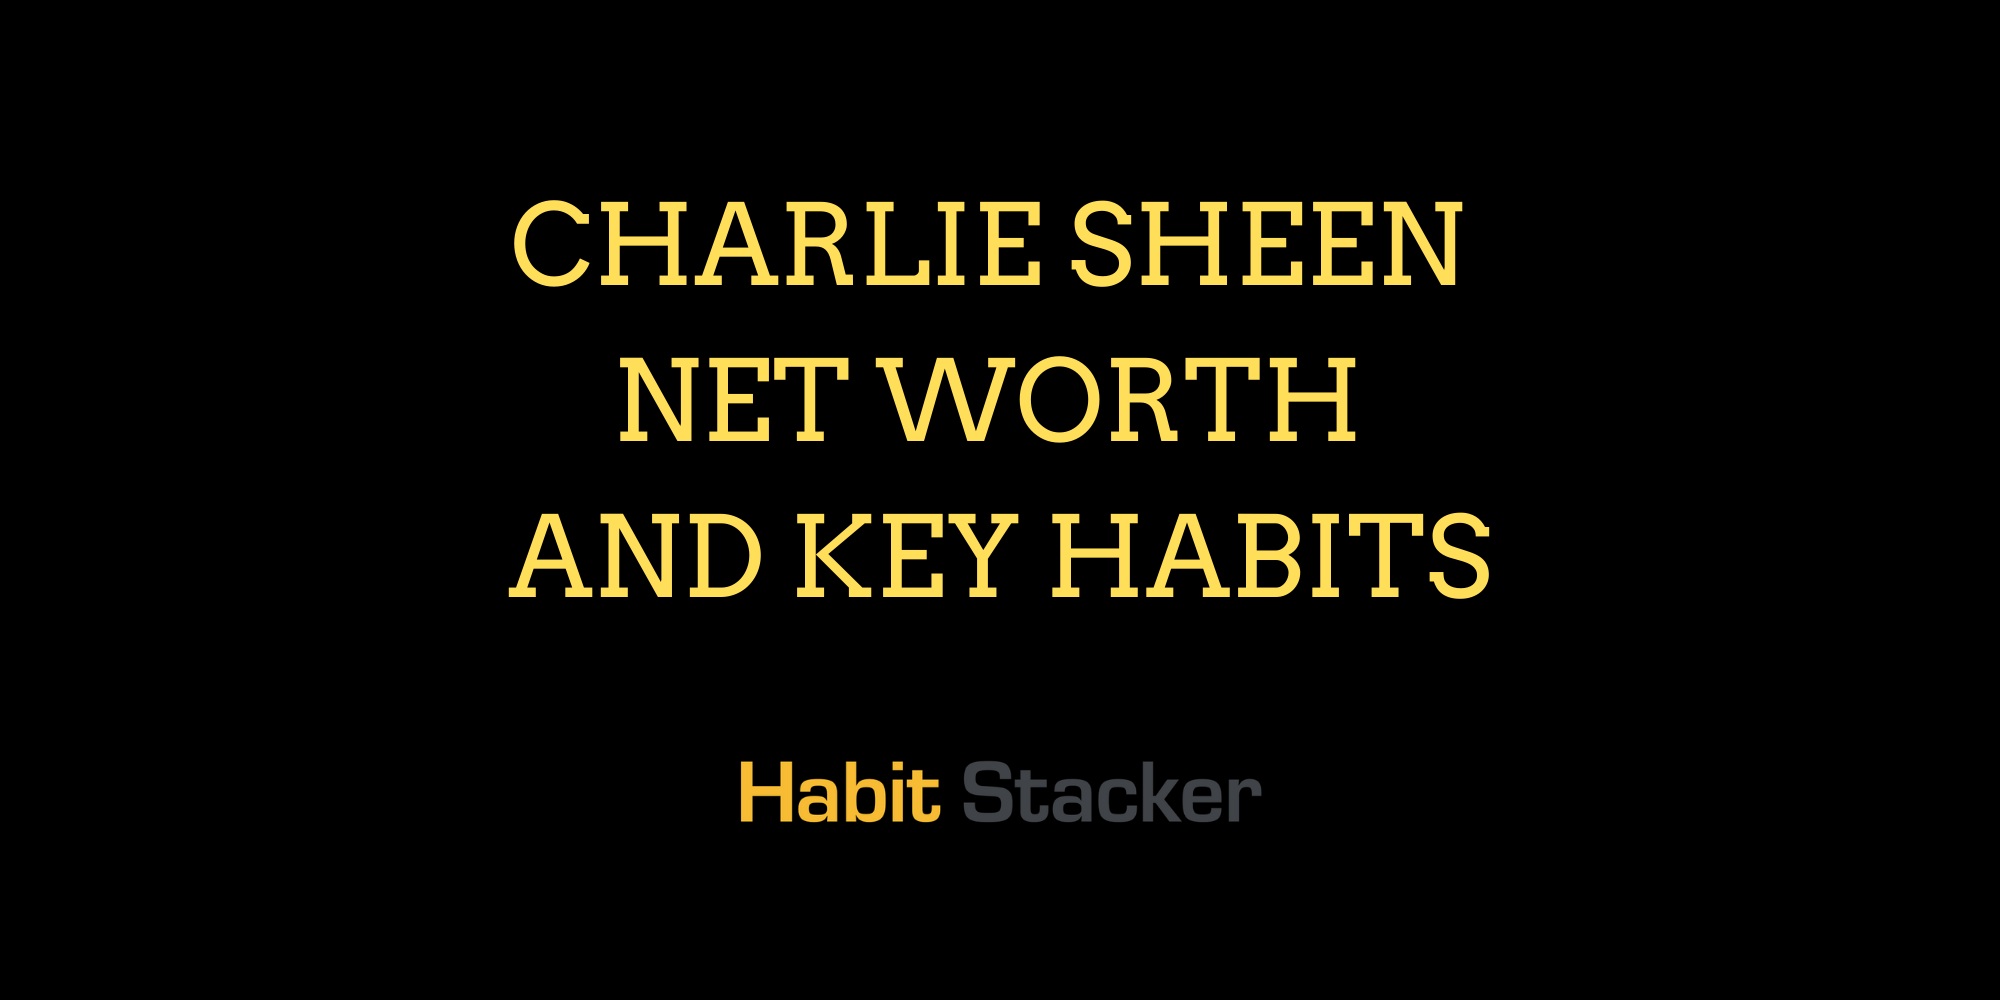 Charlie Sheen Net Worth and Key Habits